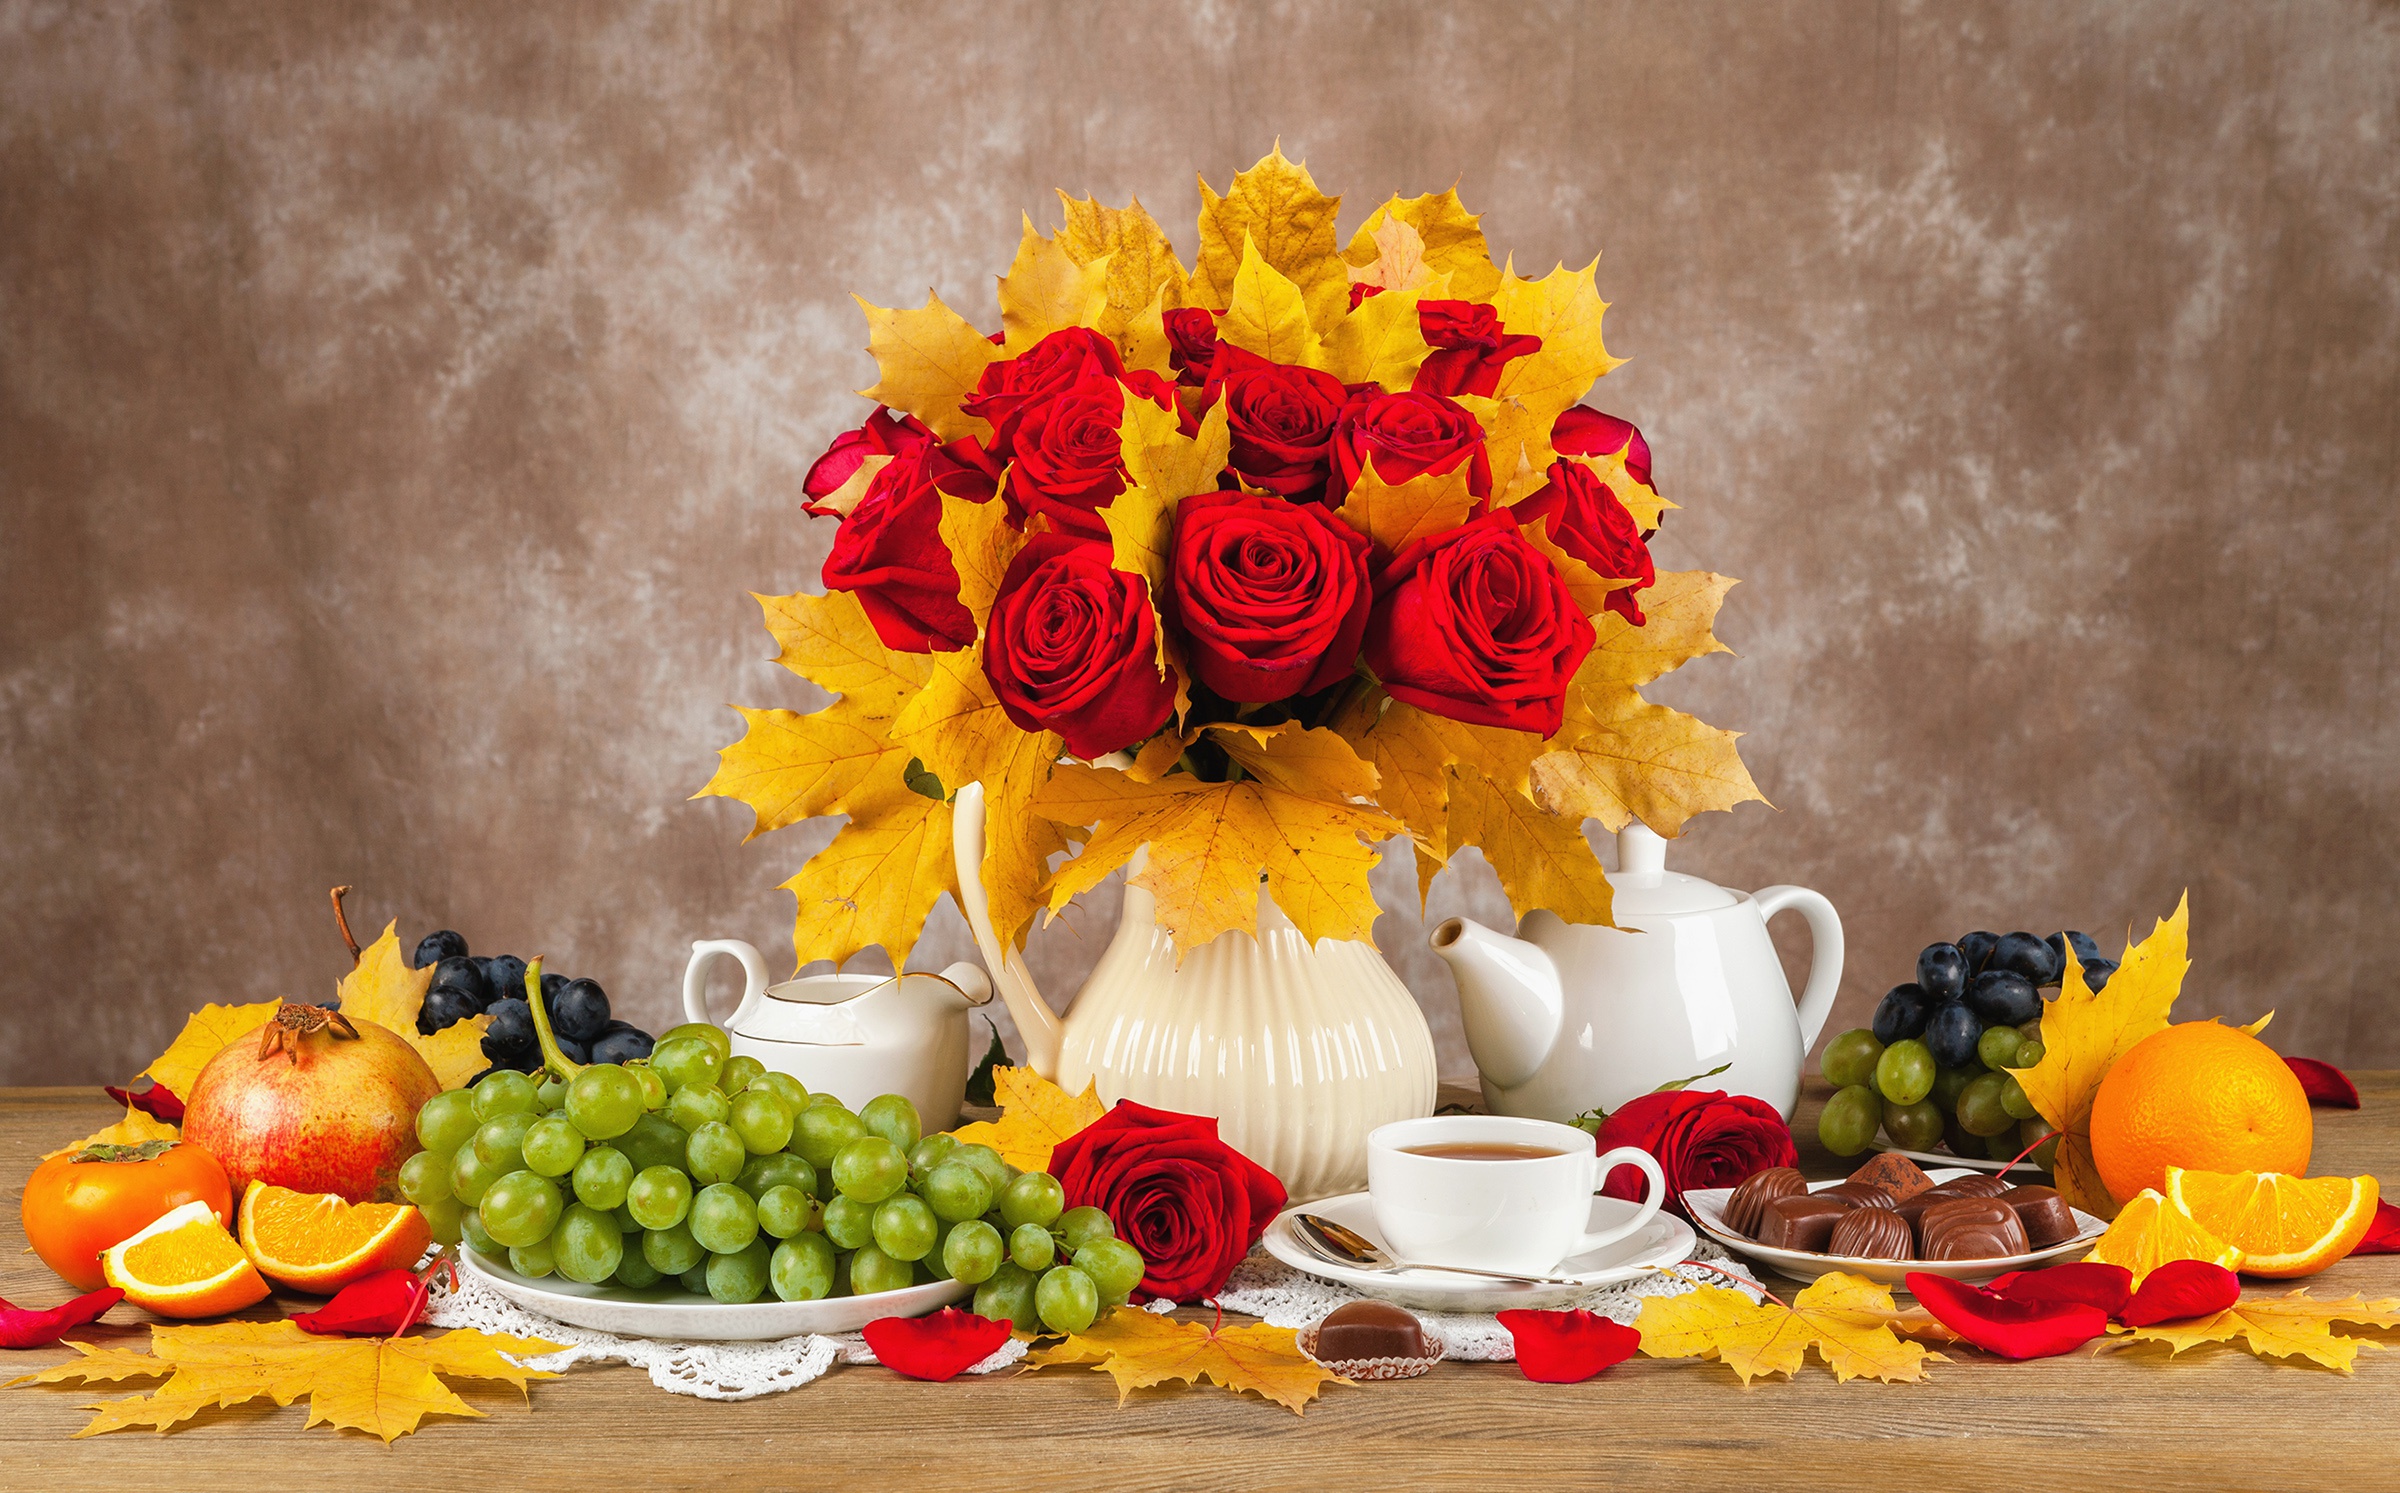 Fall Leaf Chocolate Rose Grapes Red Flower Vase Flower Fruit Pitcher 2400x1493